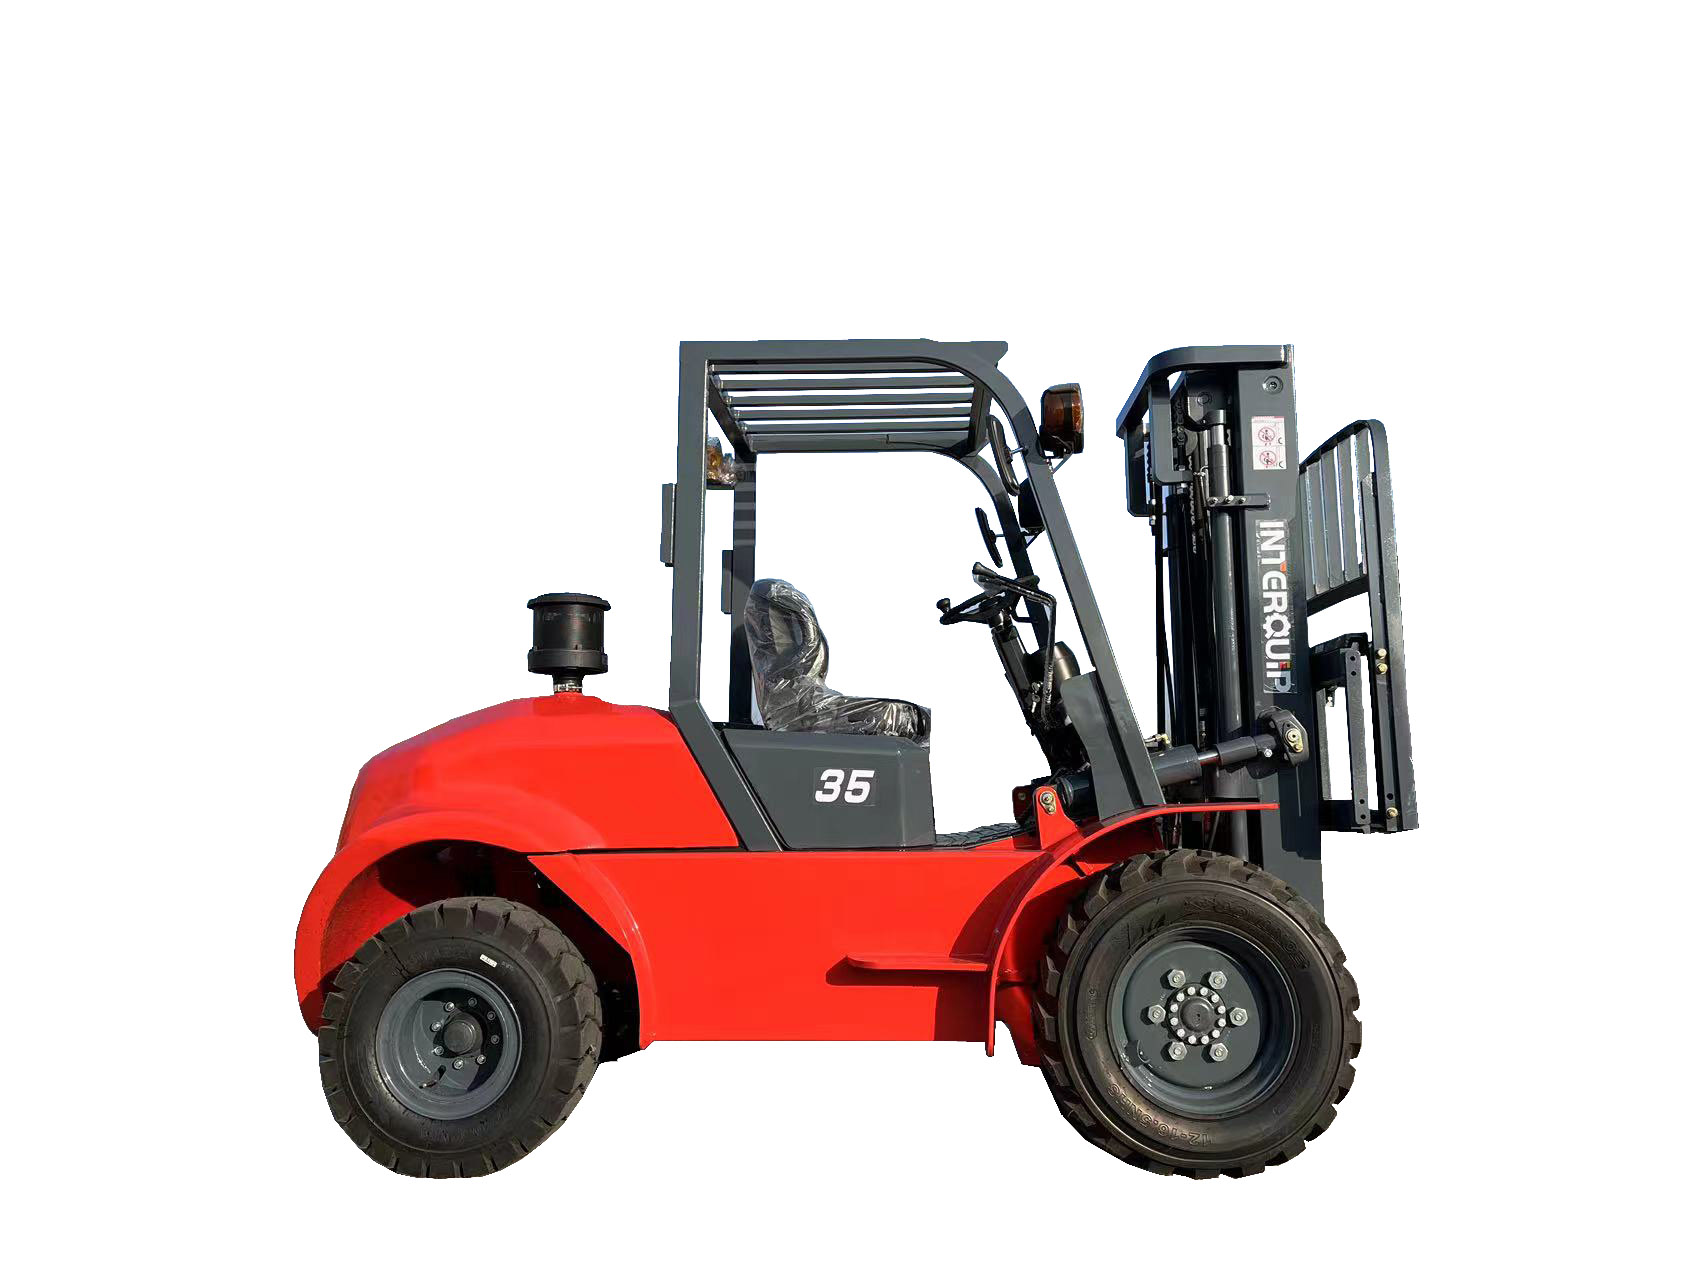 Construction and Maintenance of Forklift Transmission System